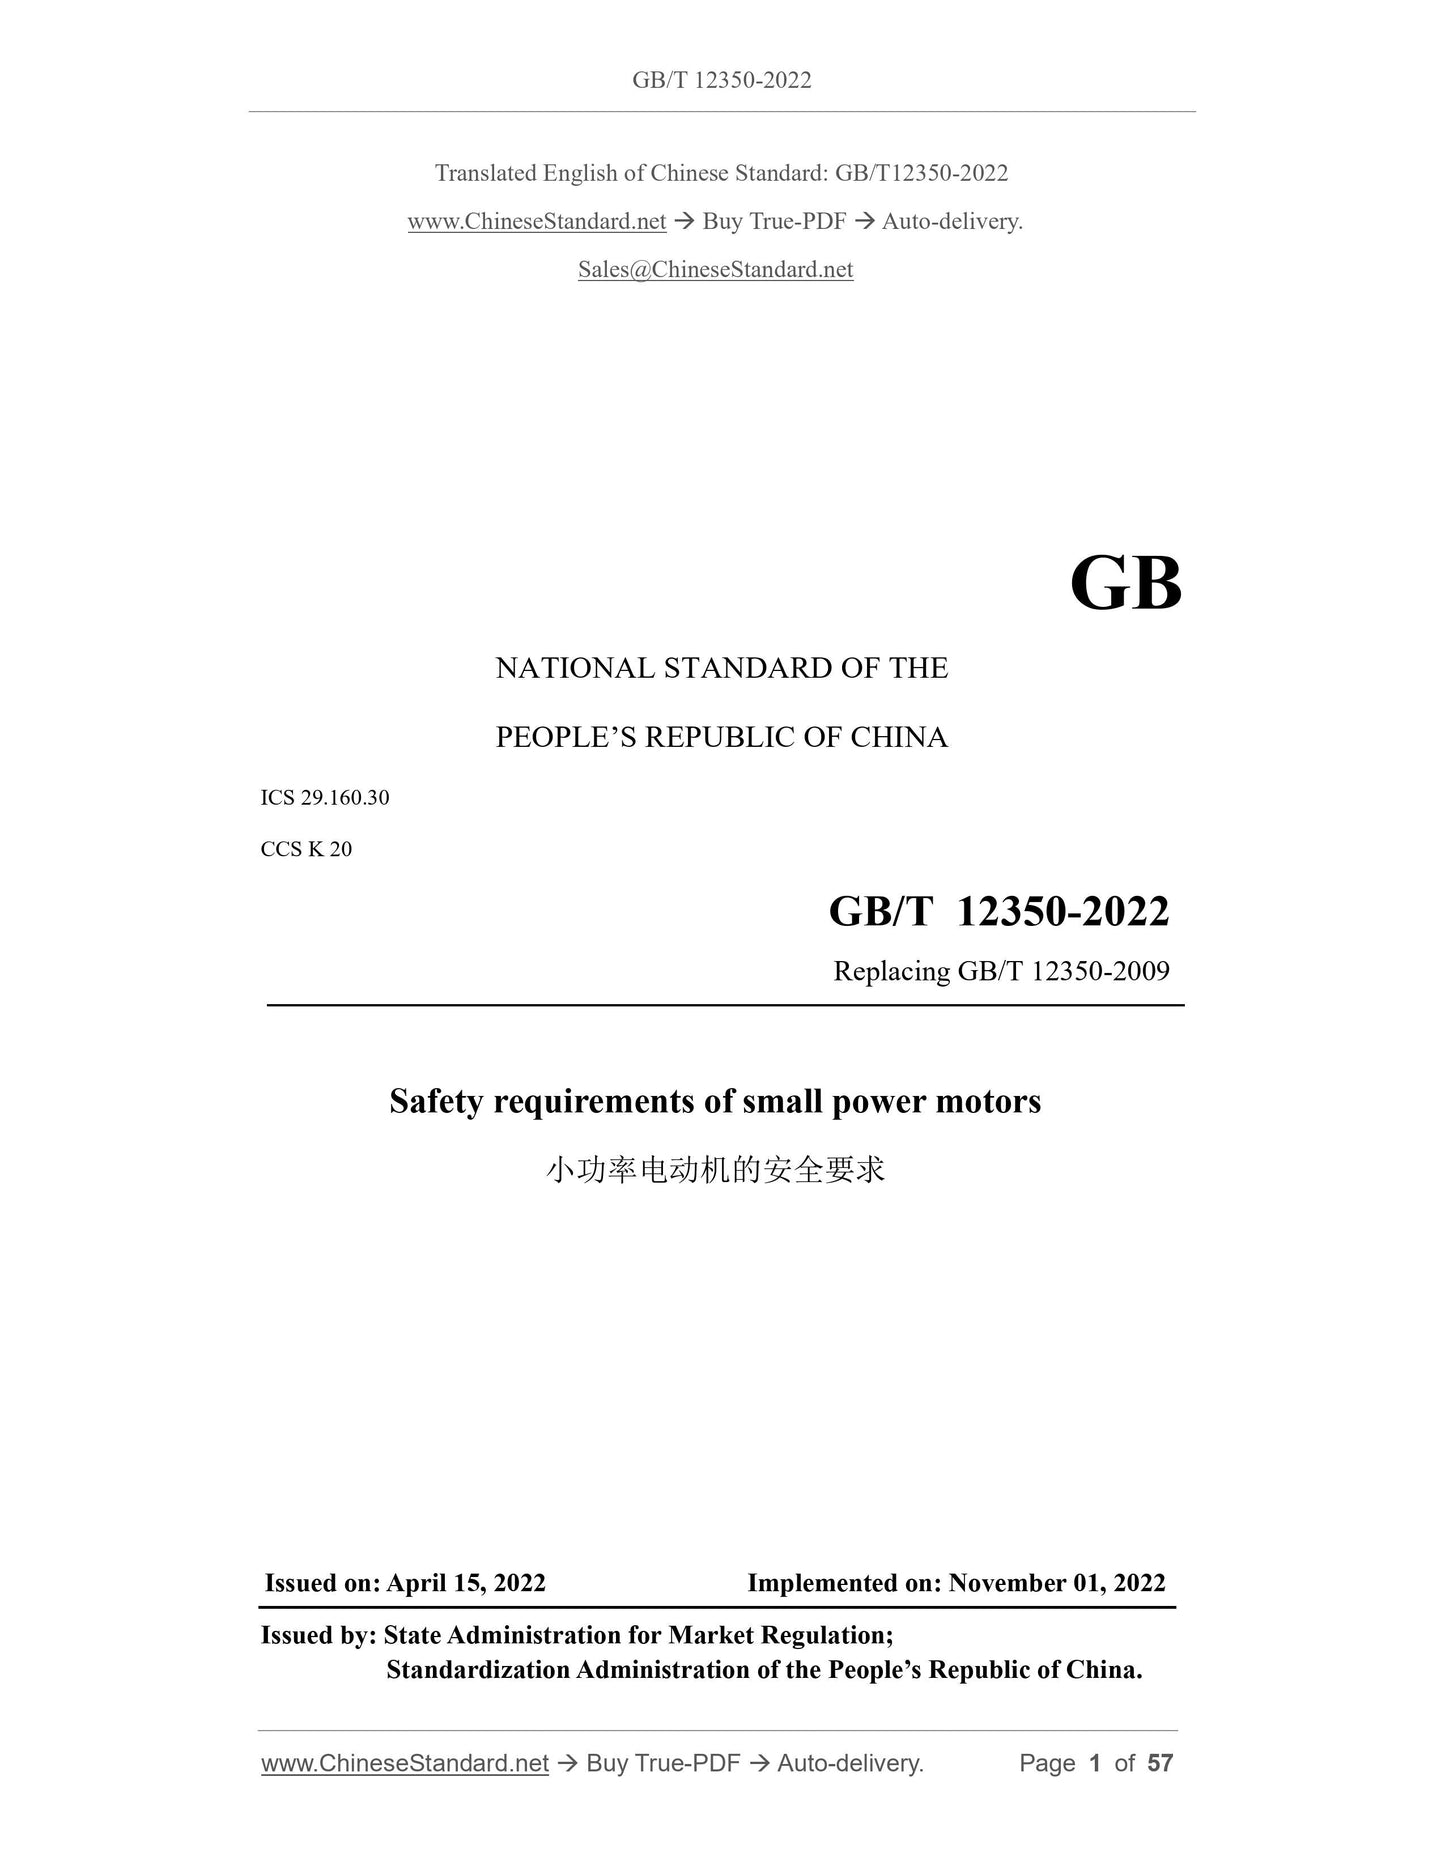 GB/T 12350-2022 Page 1